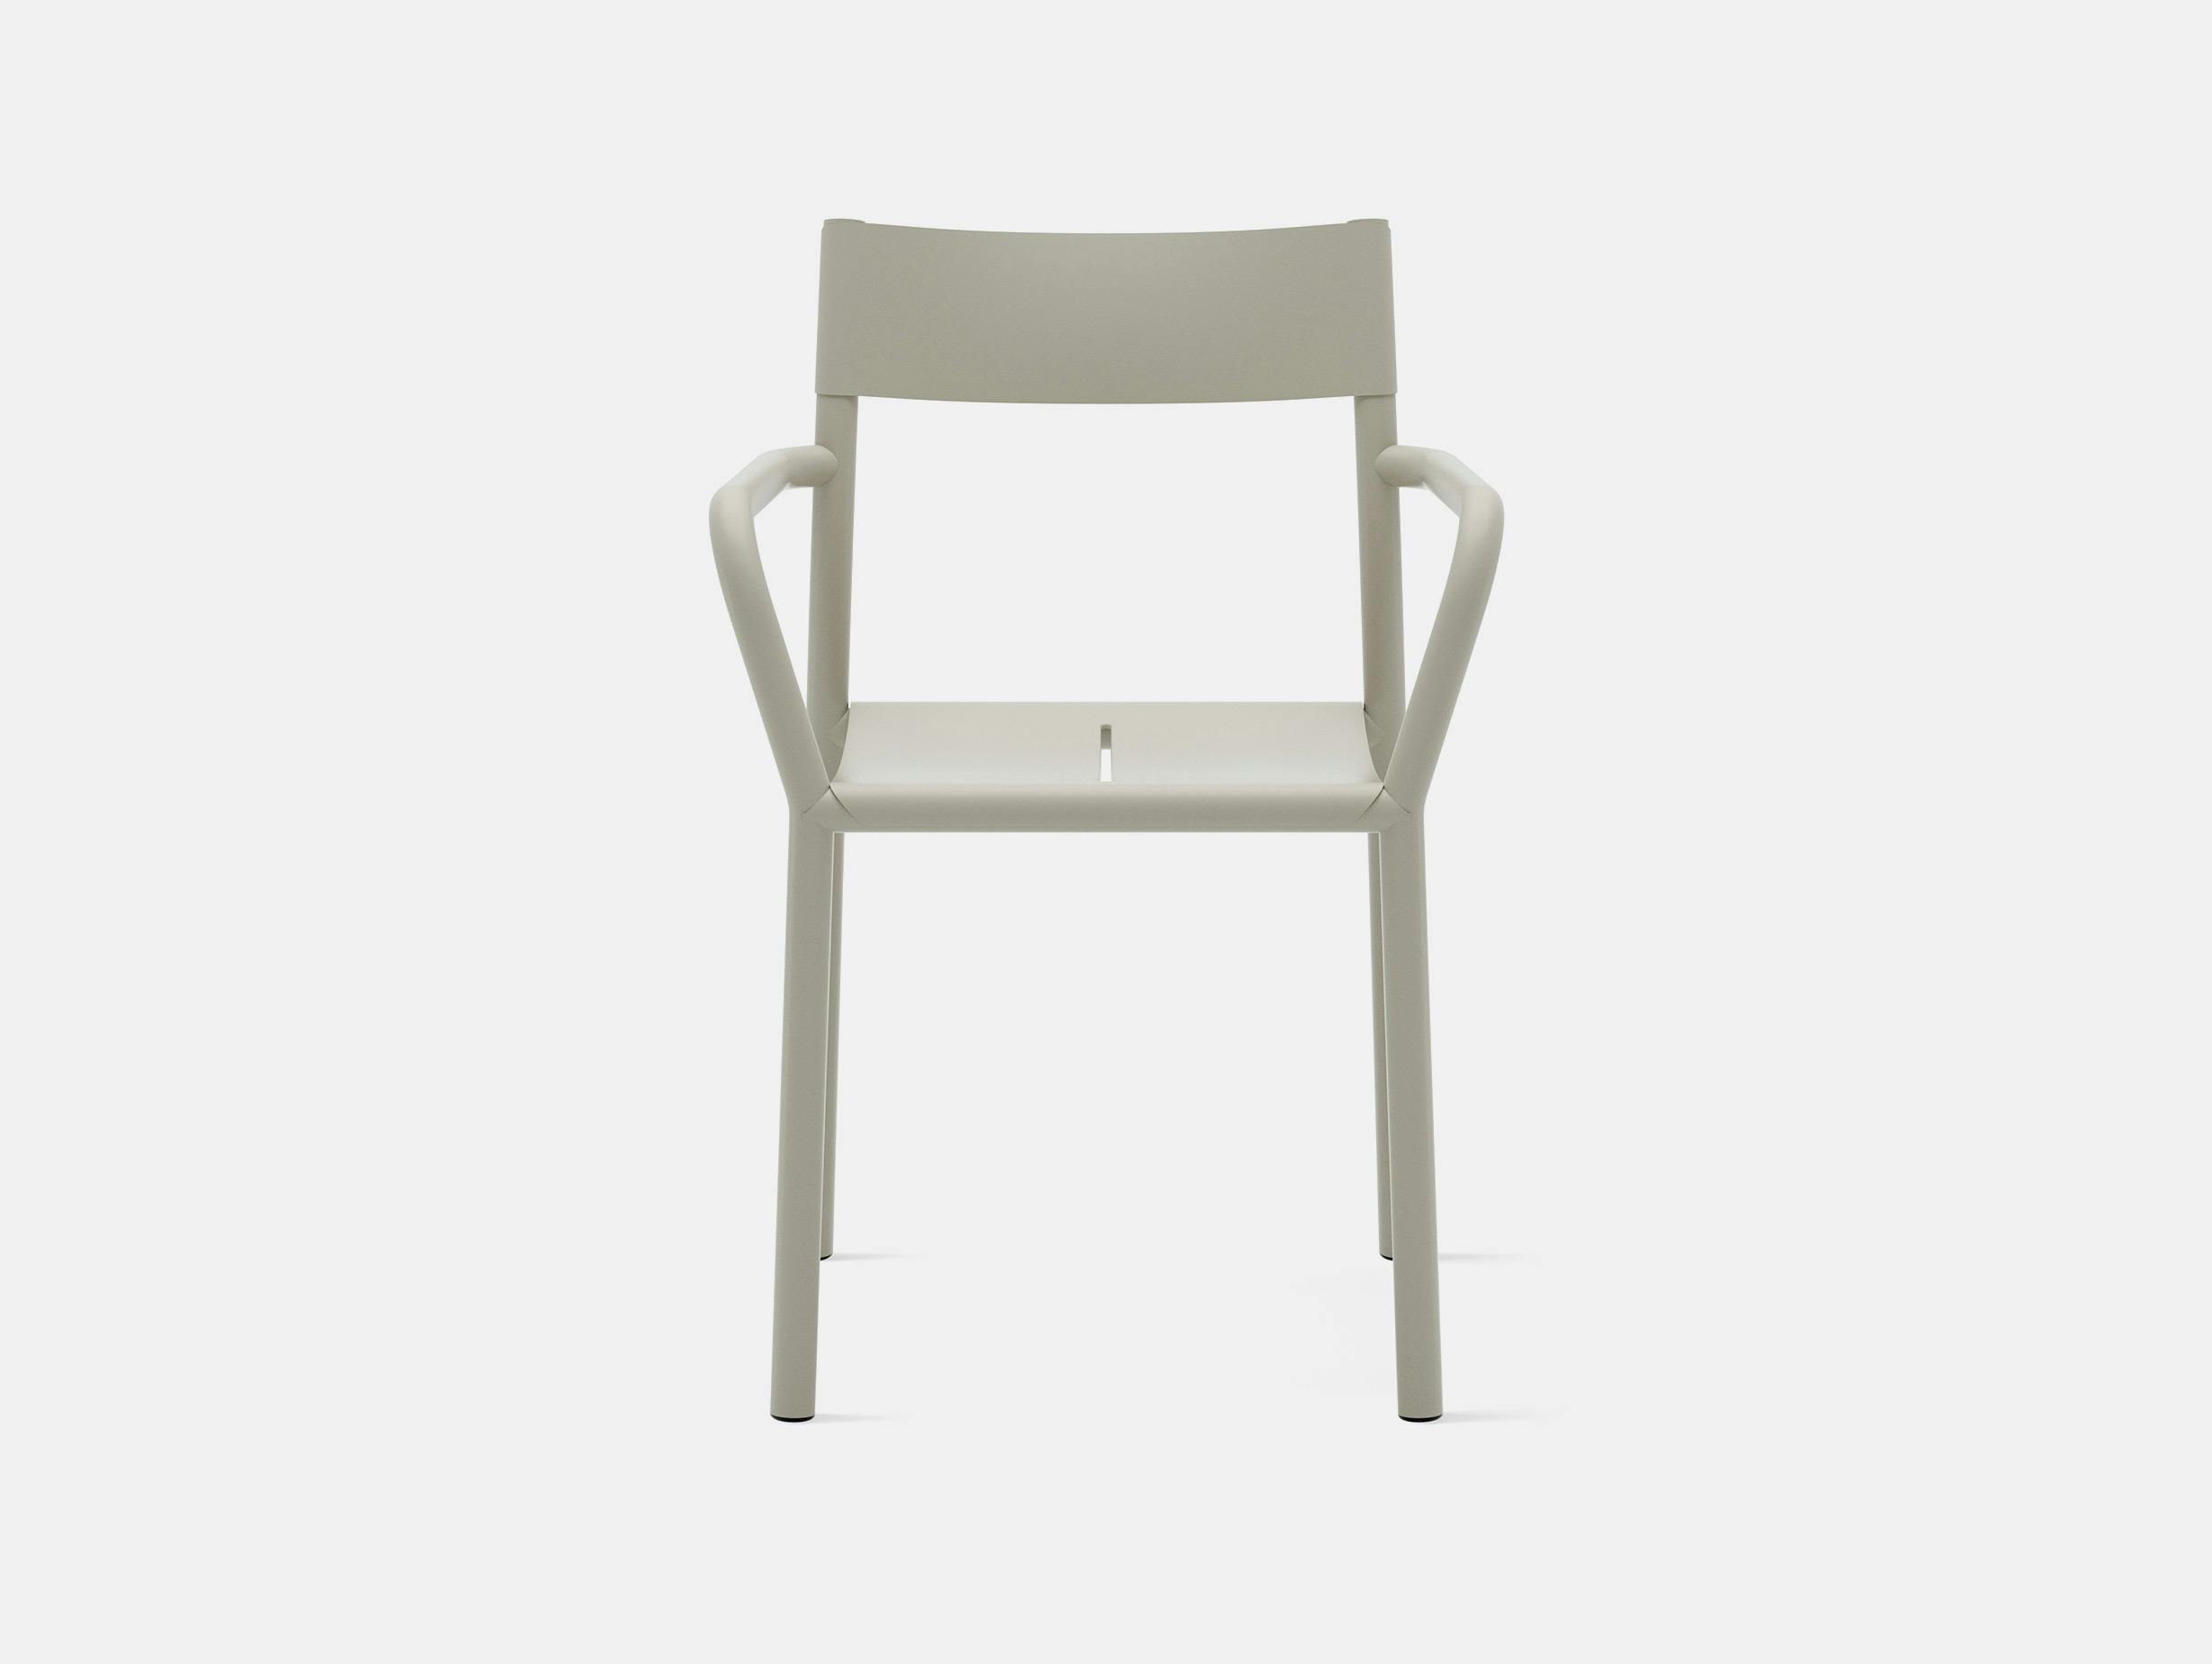 New works hannes fritz may armchair light grey2